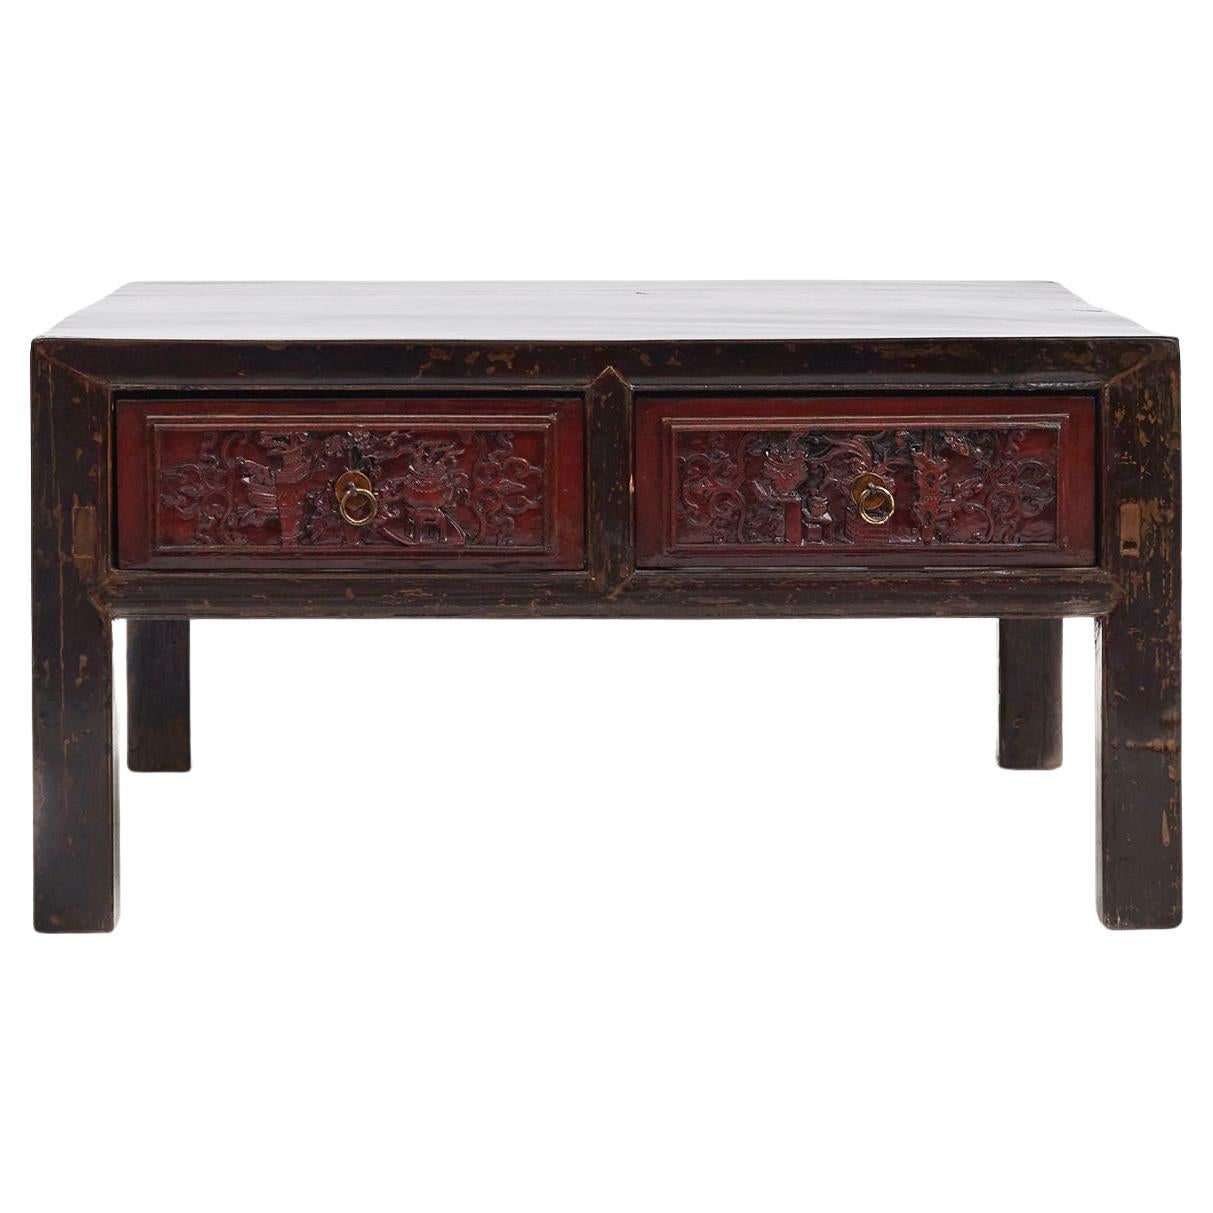 Coffee Table Chinese, 1850-1870